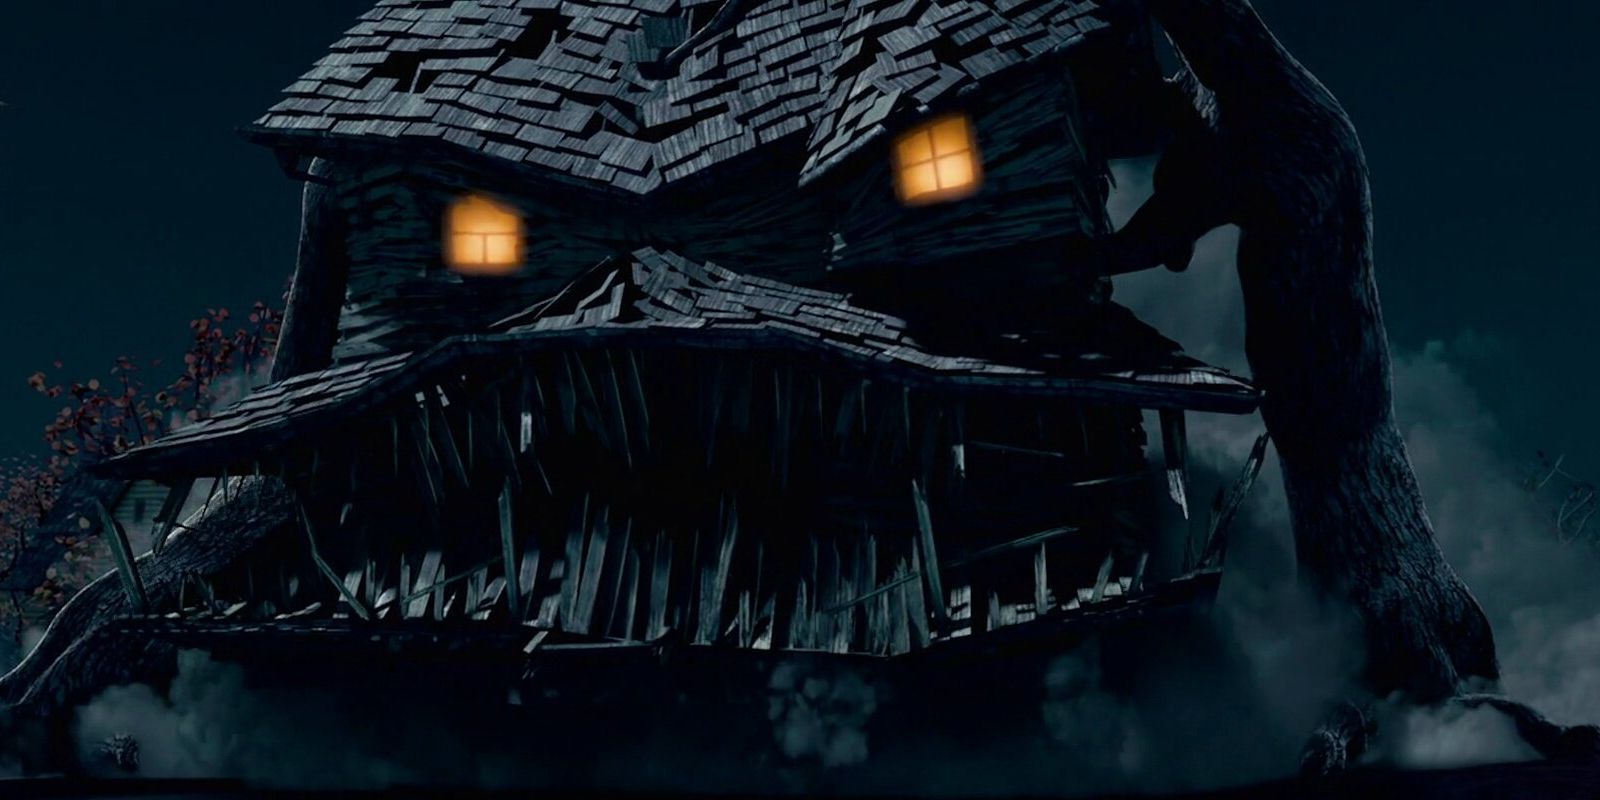 The haunted house in Monster House has come alive, with teeth on its front porch